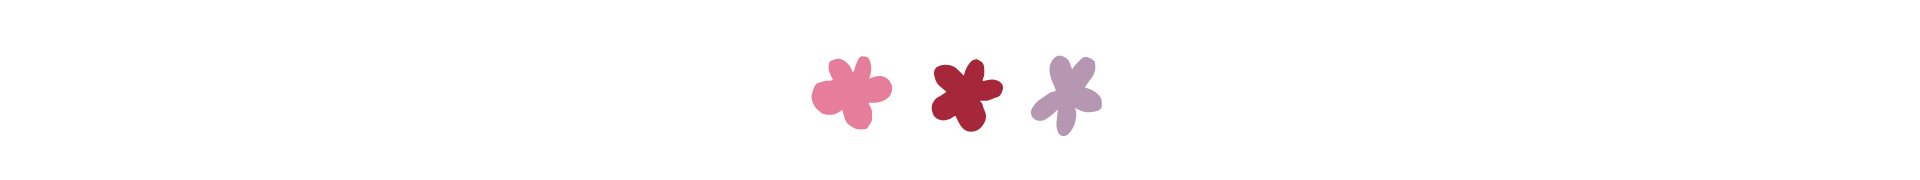 flowers_line.png